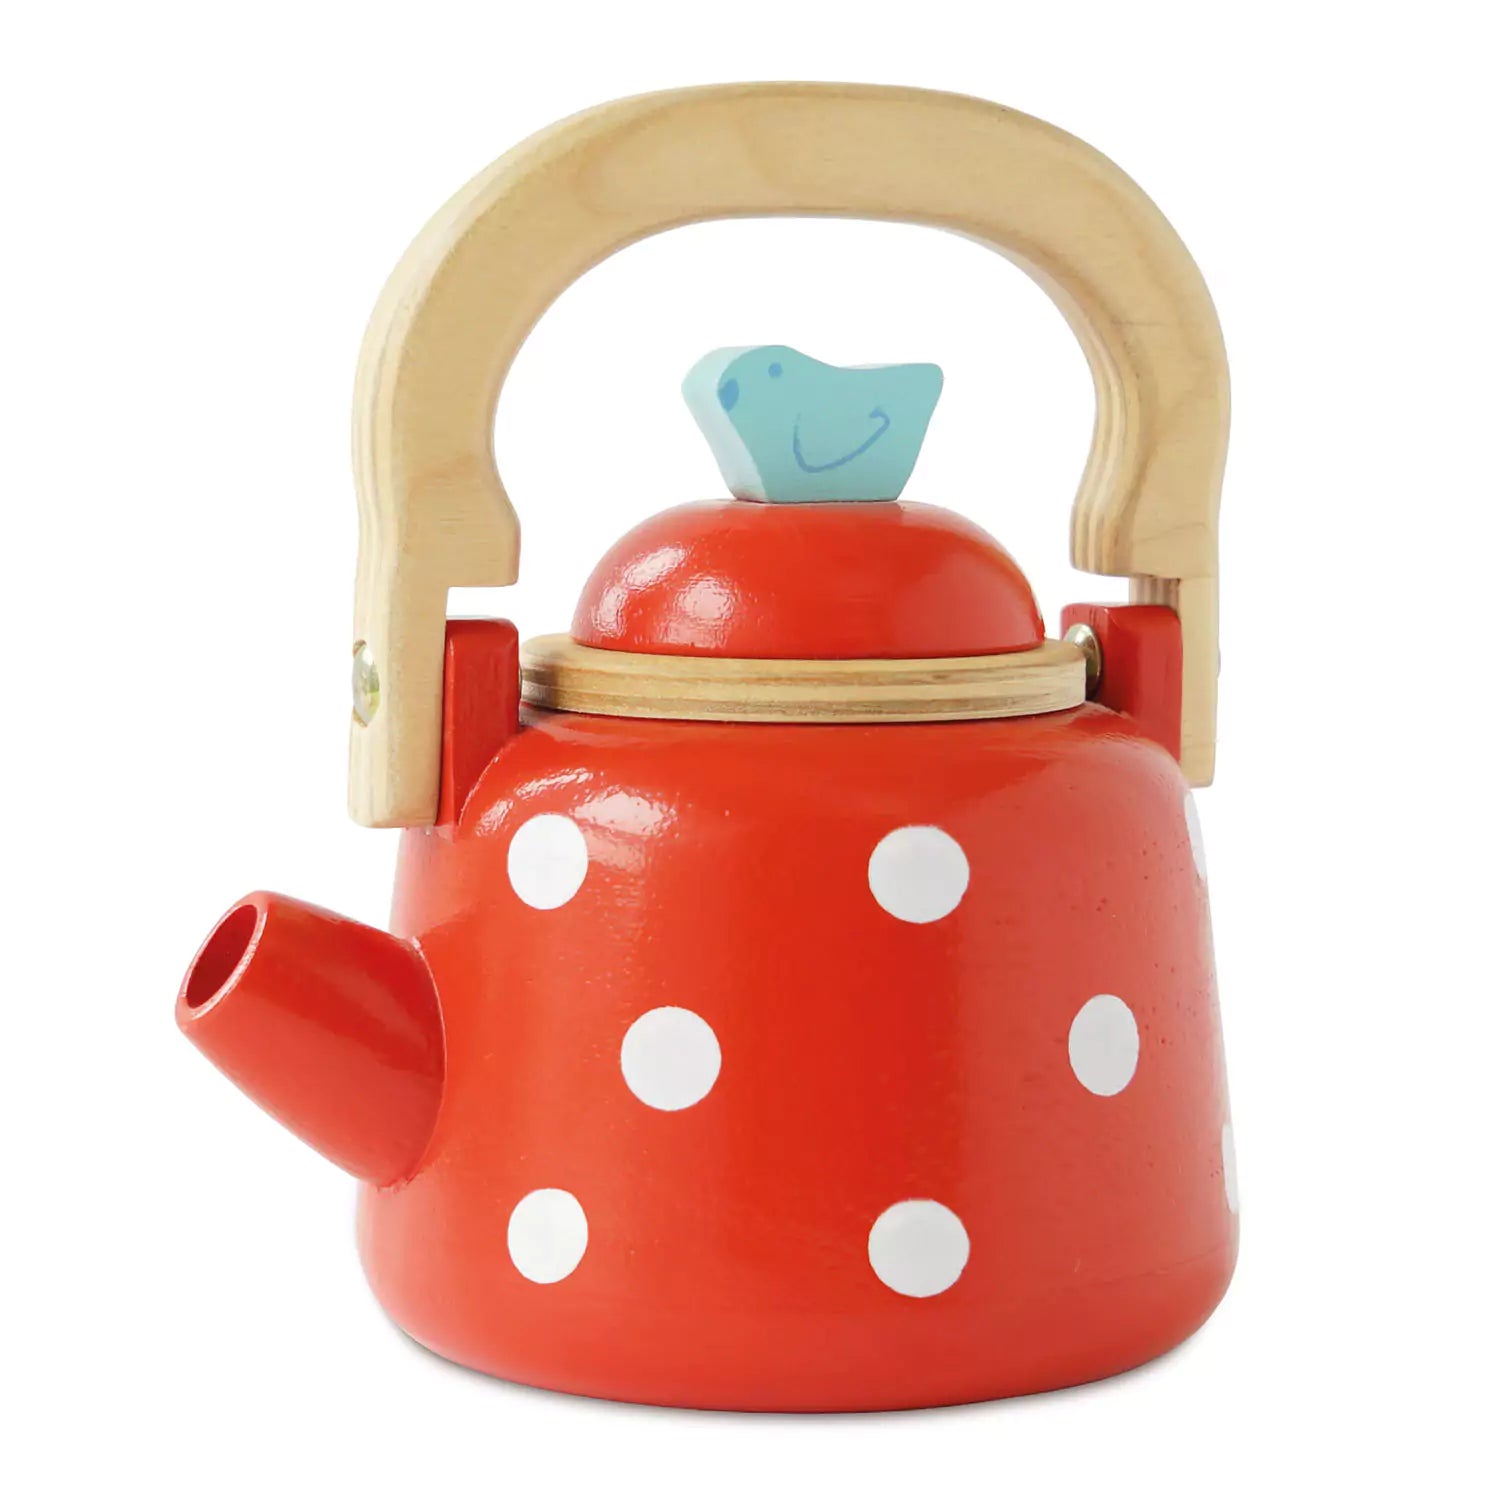 An image of Le Toy Van Dotty Kettle | Playtime | SmallSmart.co.uk